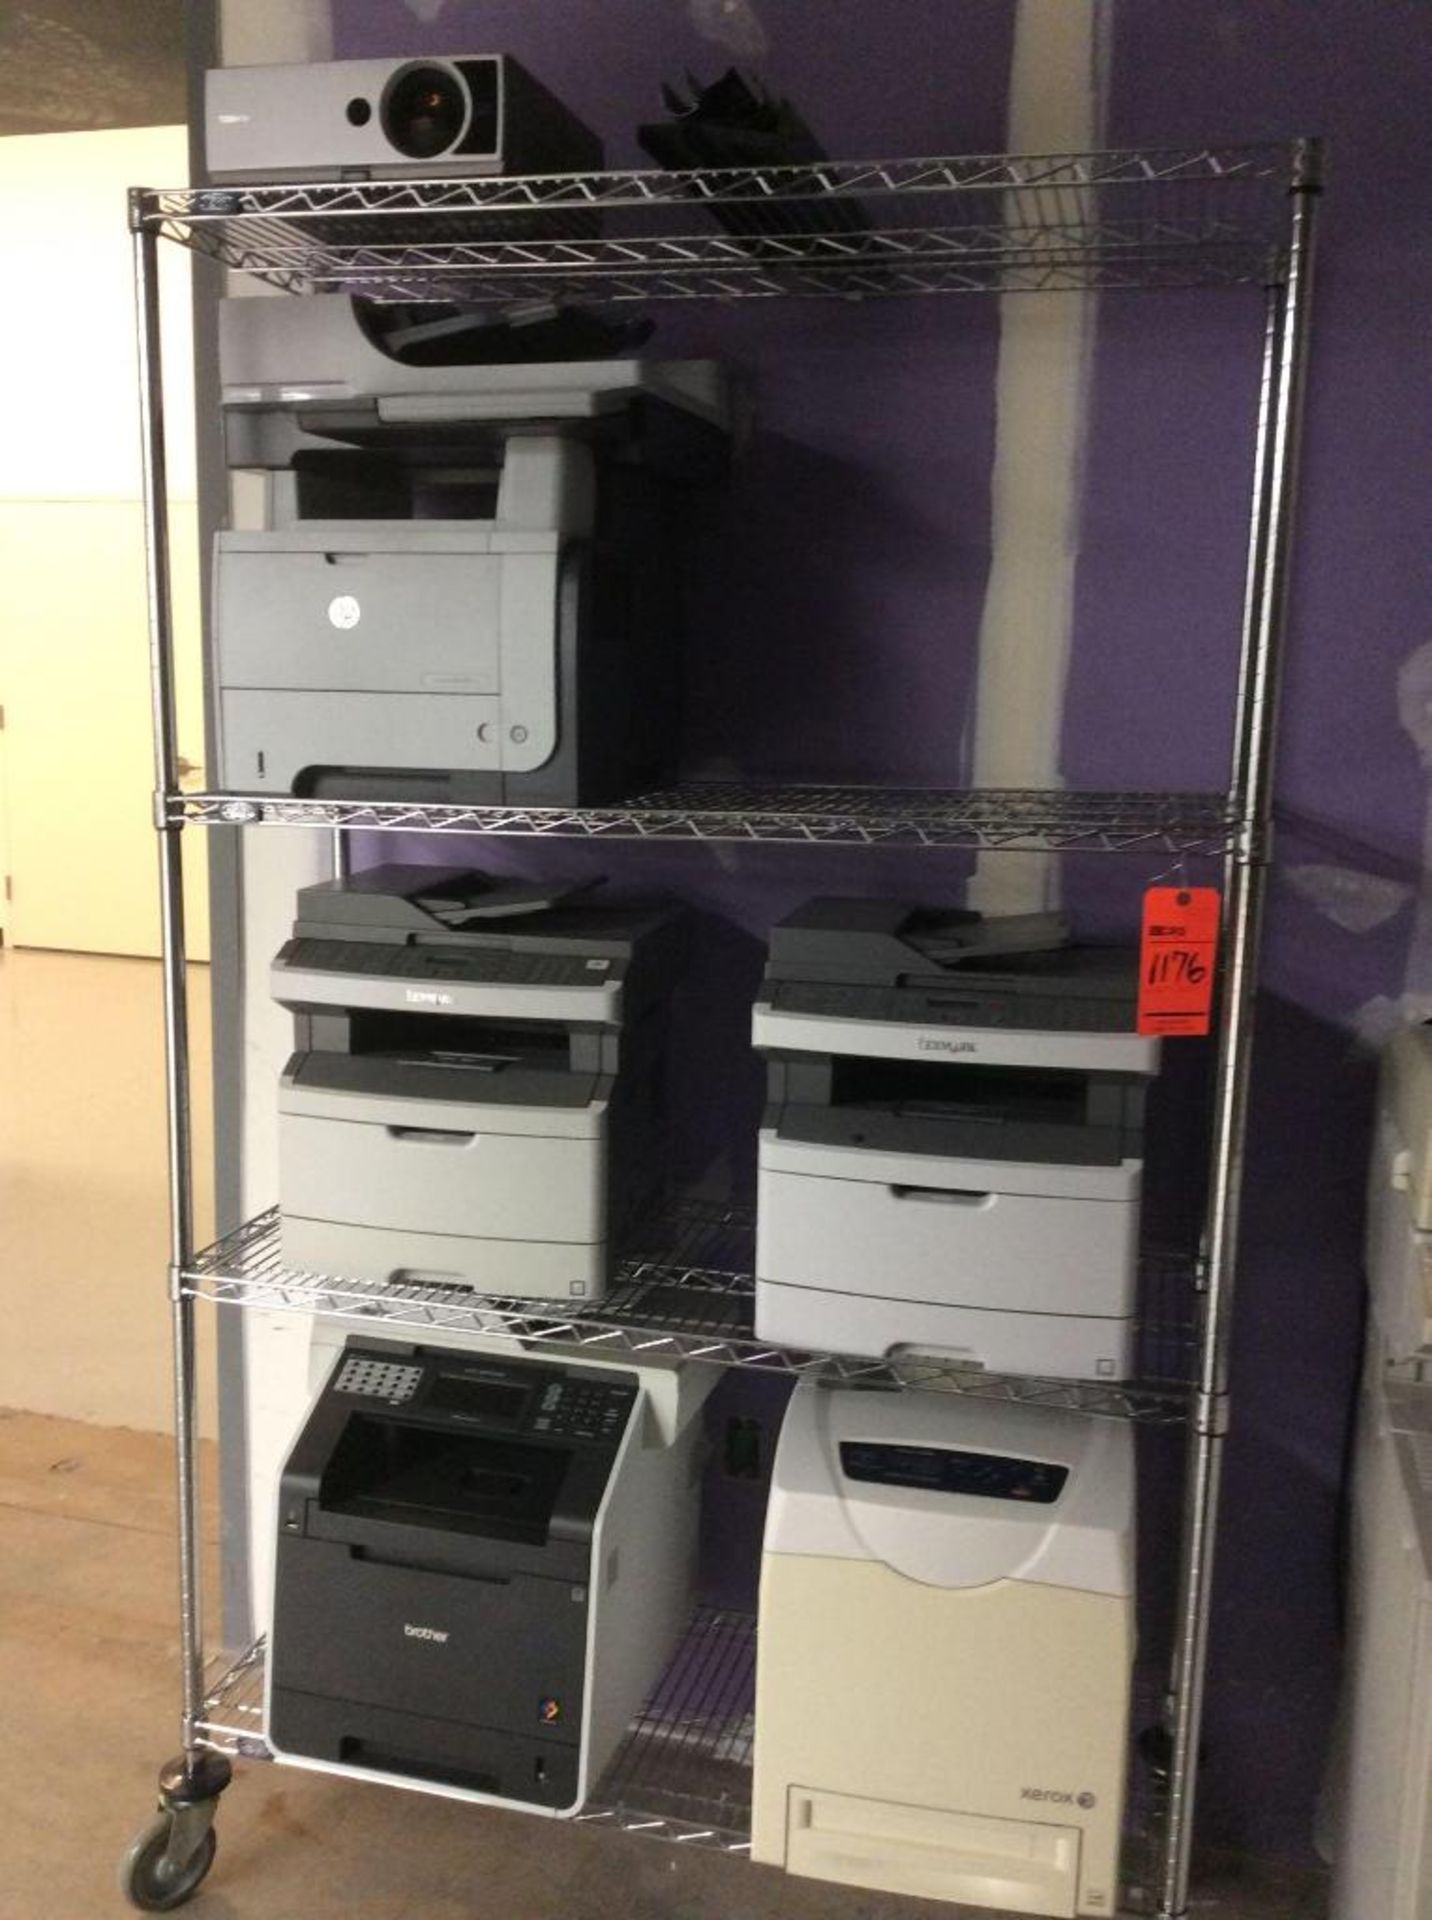 Large lot of assorted IT equipment contained on 7 rolling racks - includes monitors, printers, wires